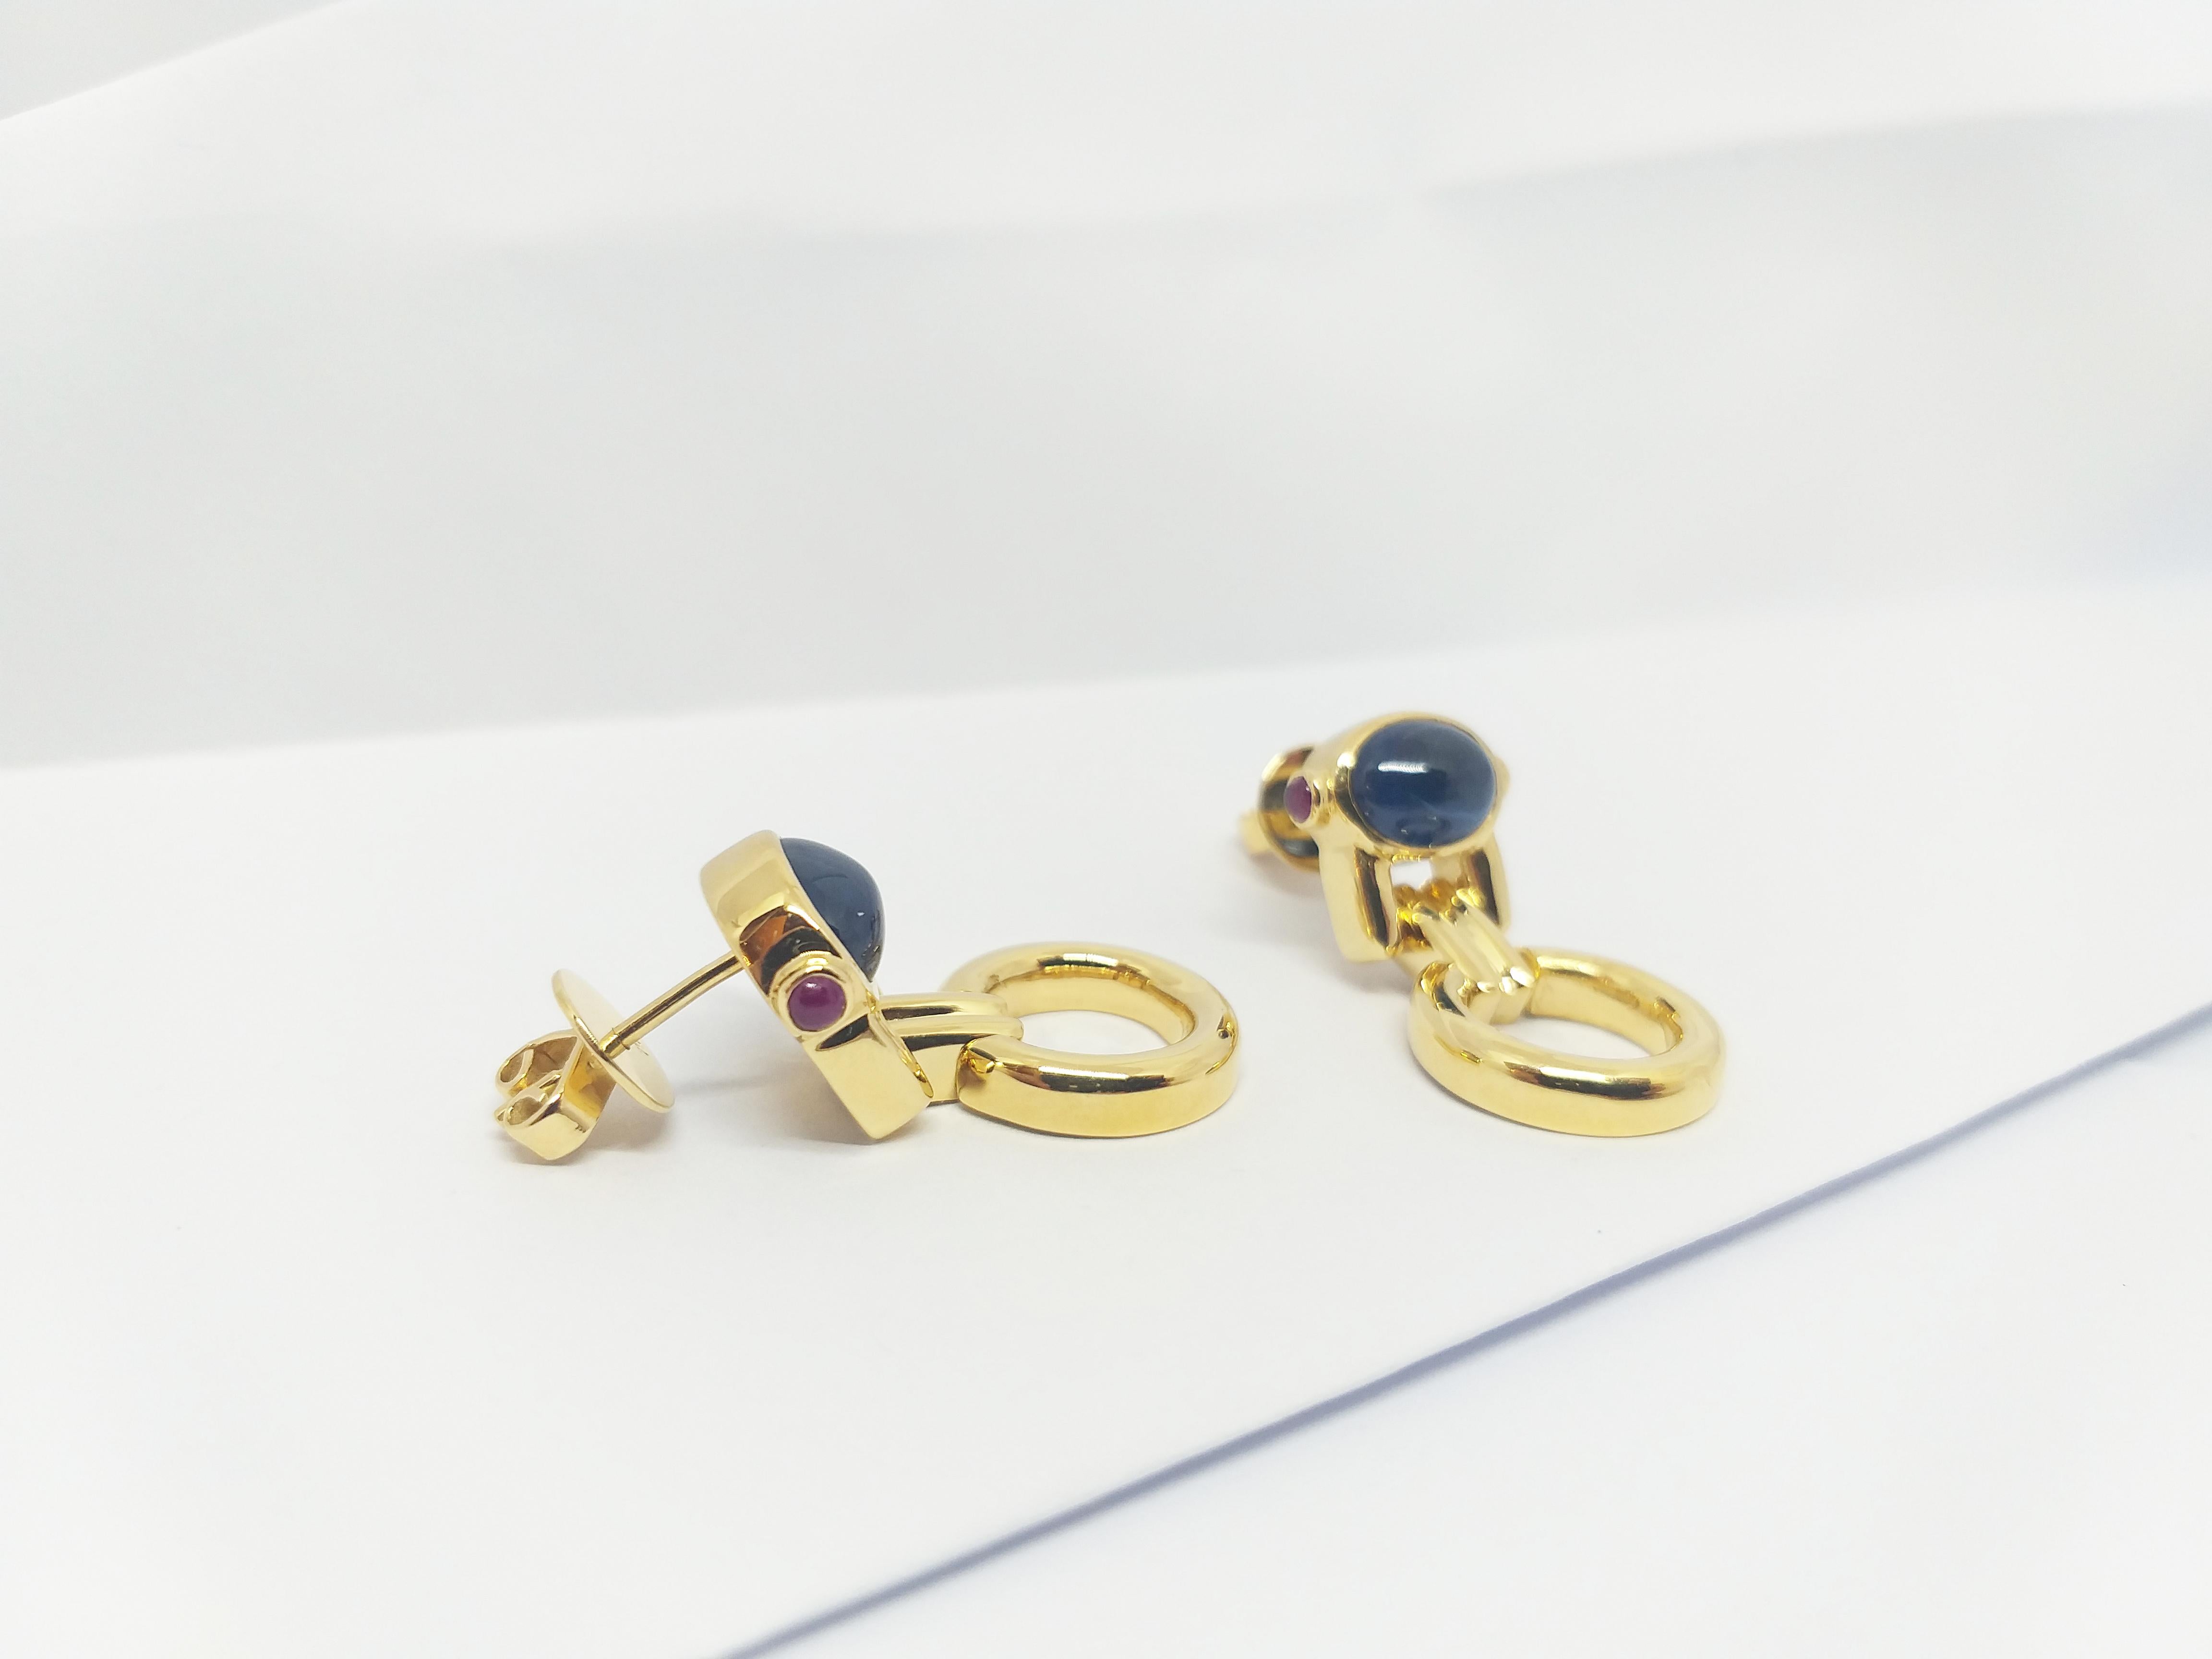 Cabochon Blue Sapphire with Cabochon Ruby Earrings set in 18K Gold Settings For Sale 2